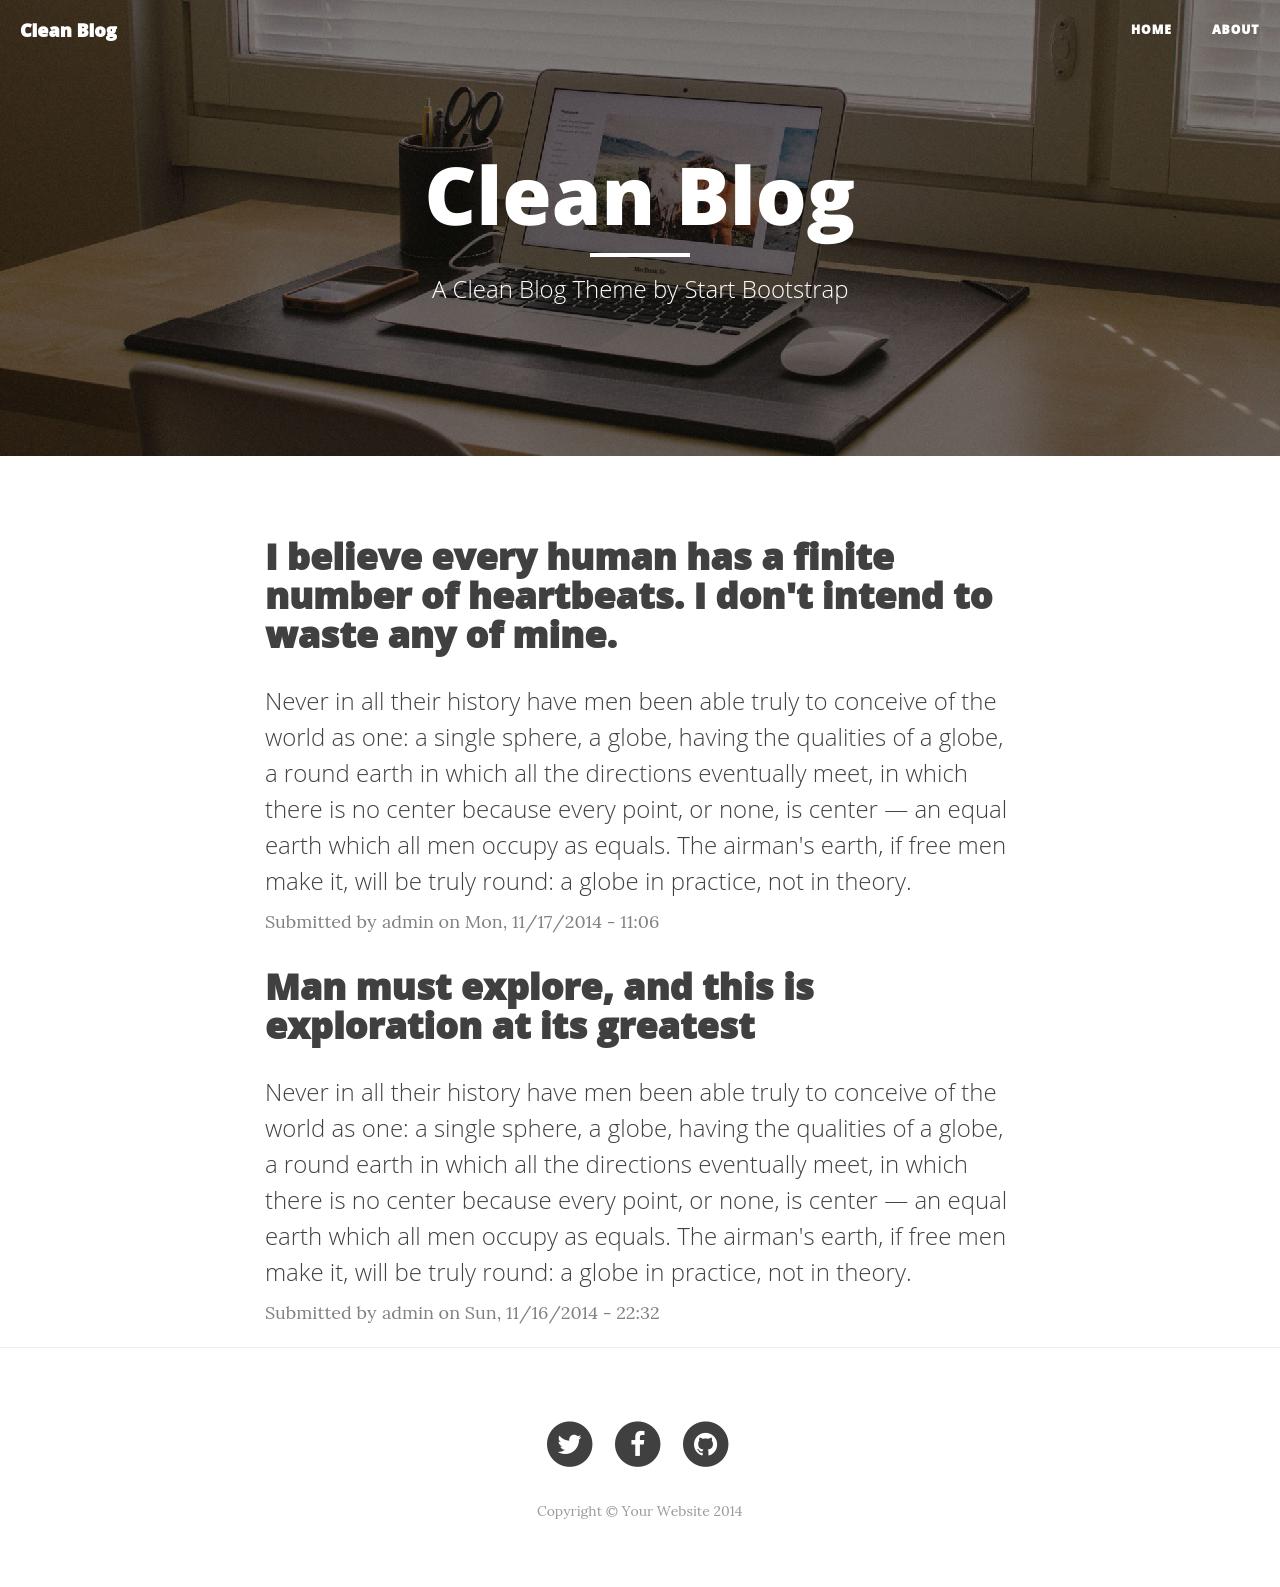 Free Bootstrap Blog Template from www.drupal.org